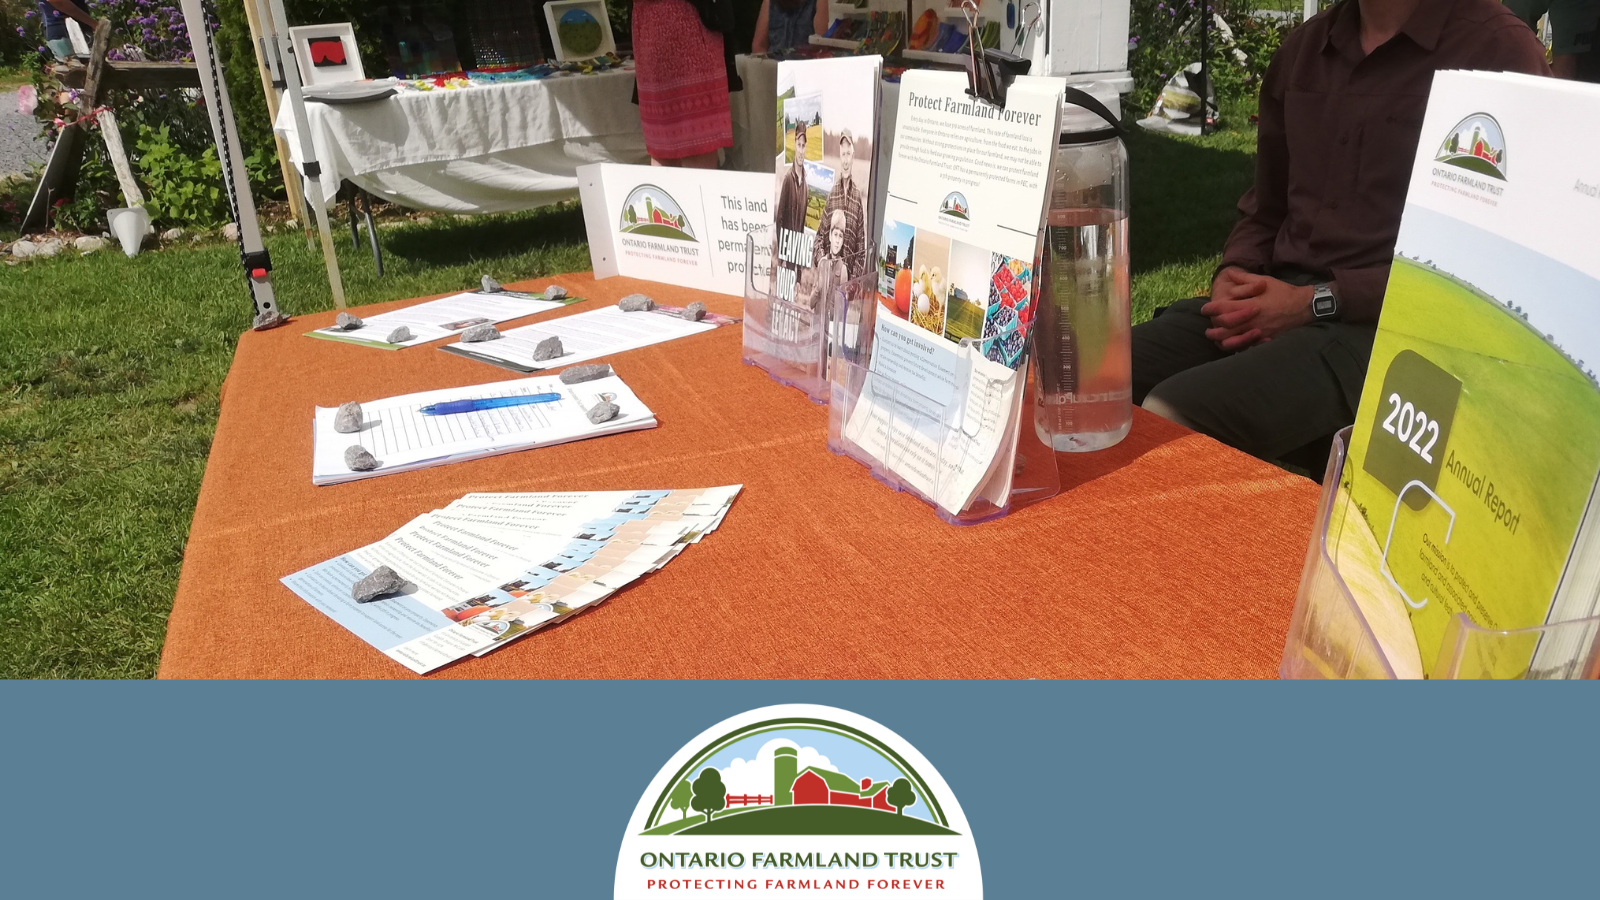 A table is covered with outreach materials and brochures for OFT.